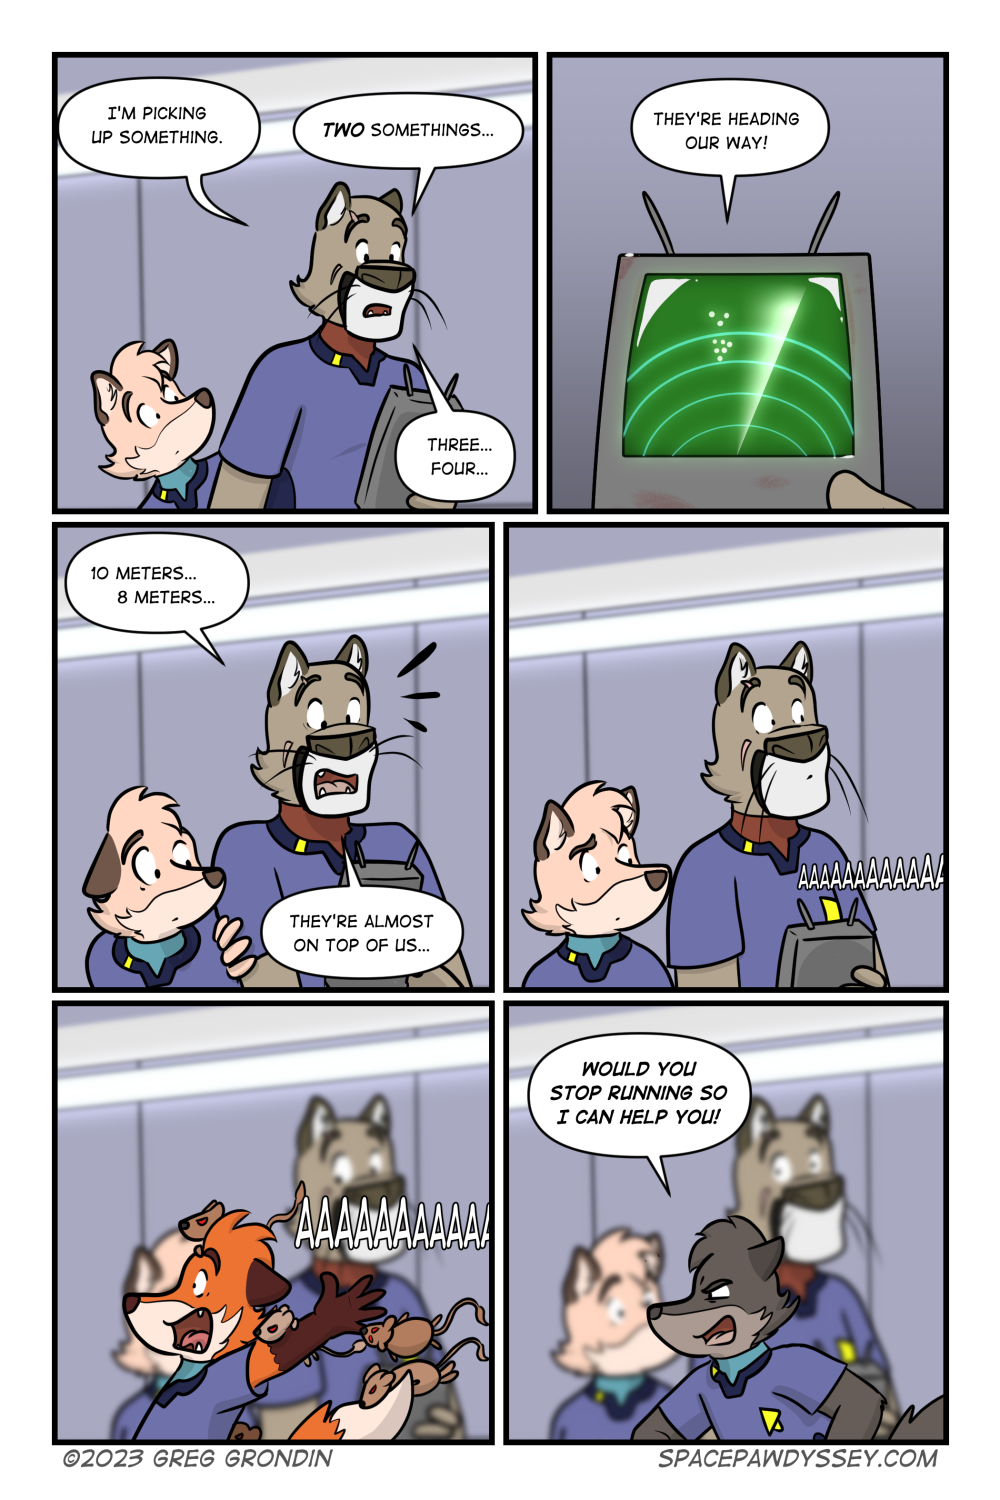 Space Pawdyssey #617